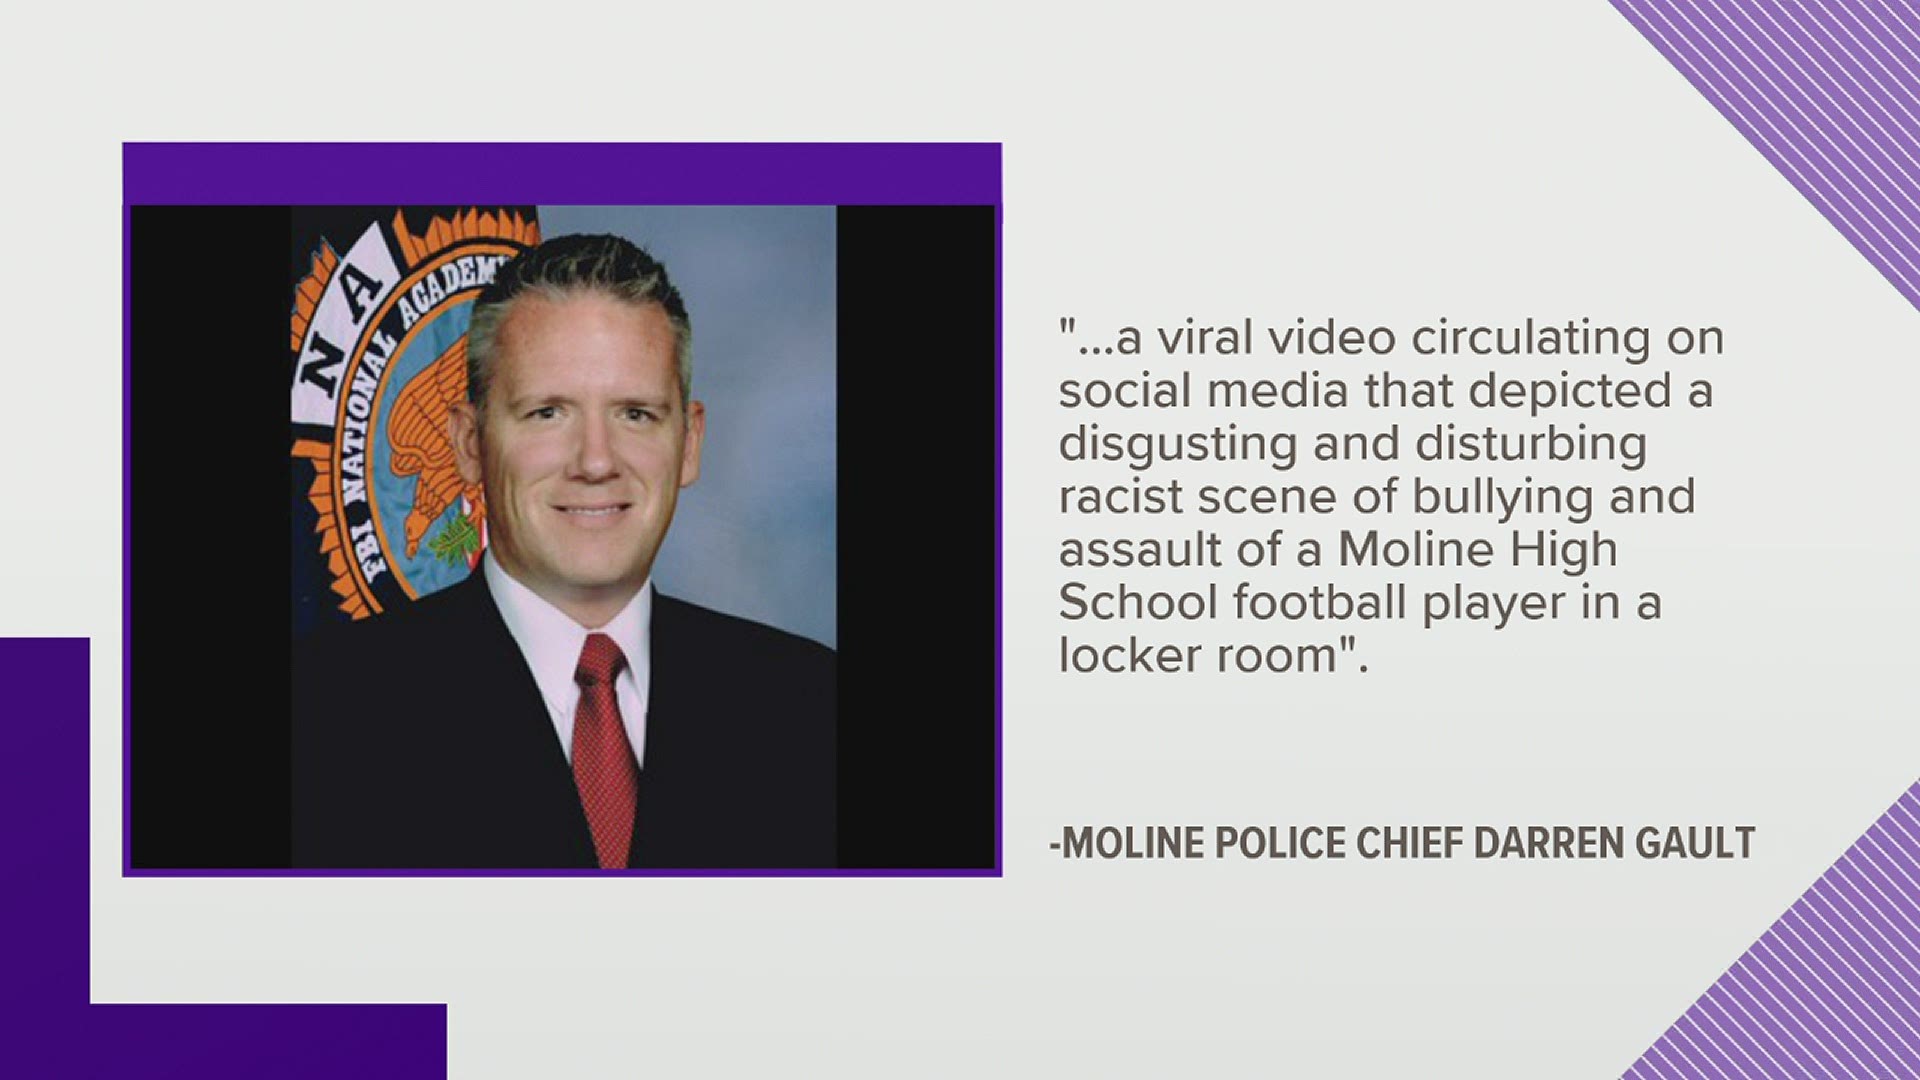 Police say they've met with the student who was the victim in the "racist" video.